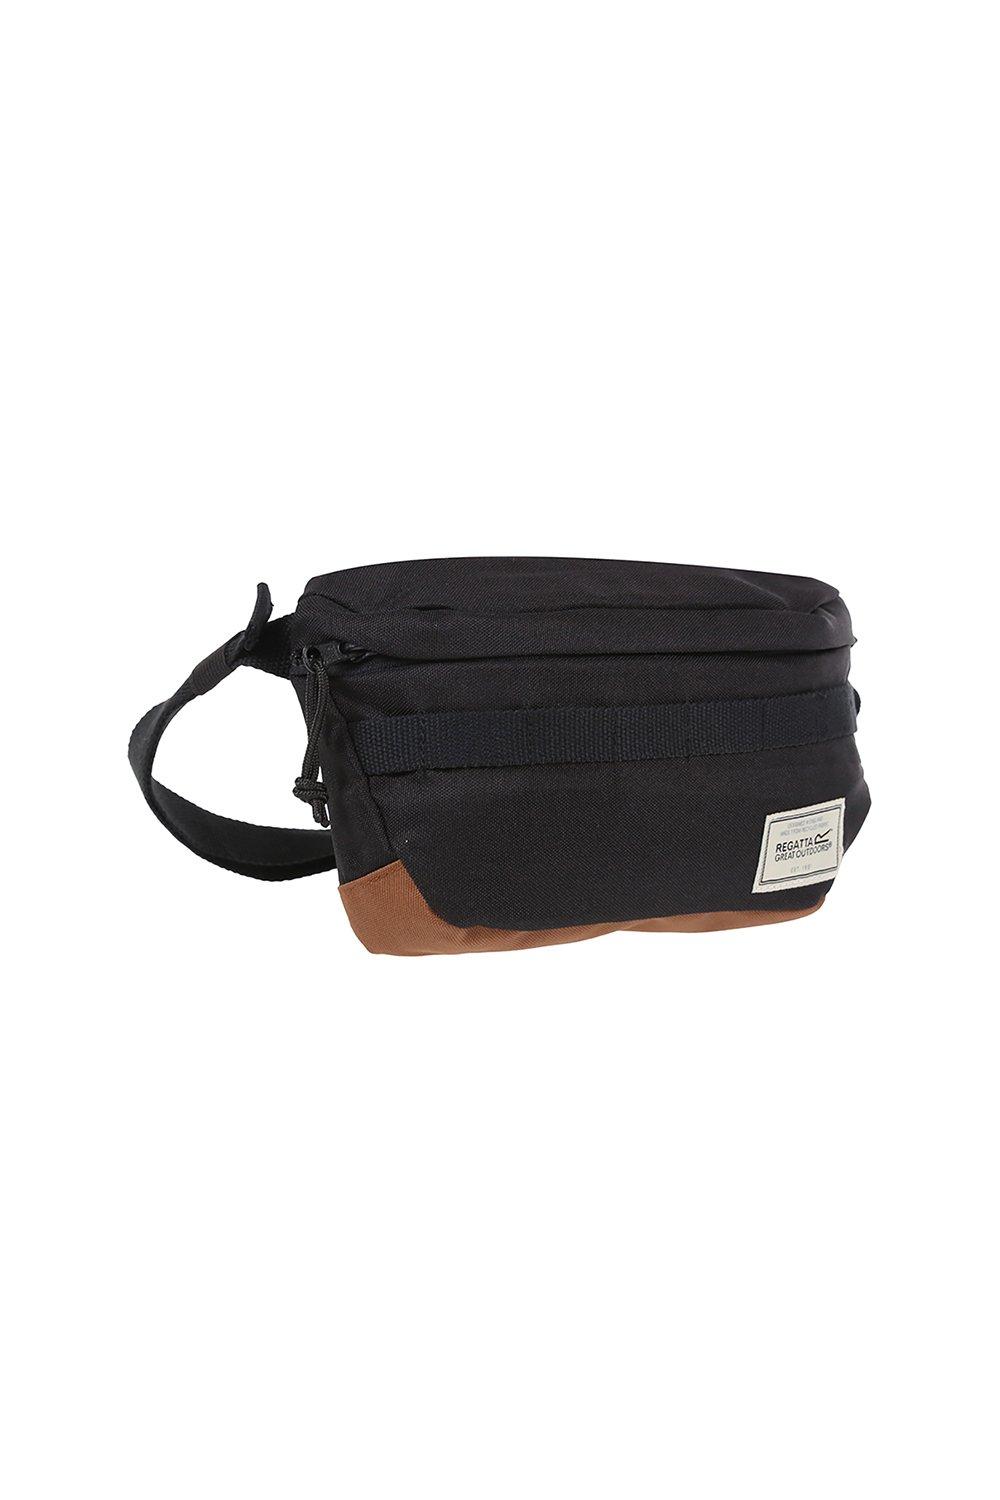 'Stamford' Recycled Travel Waist Pack